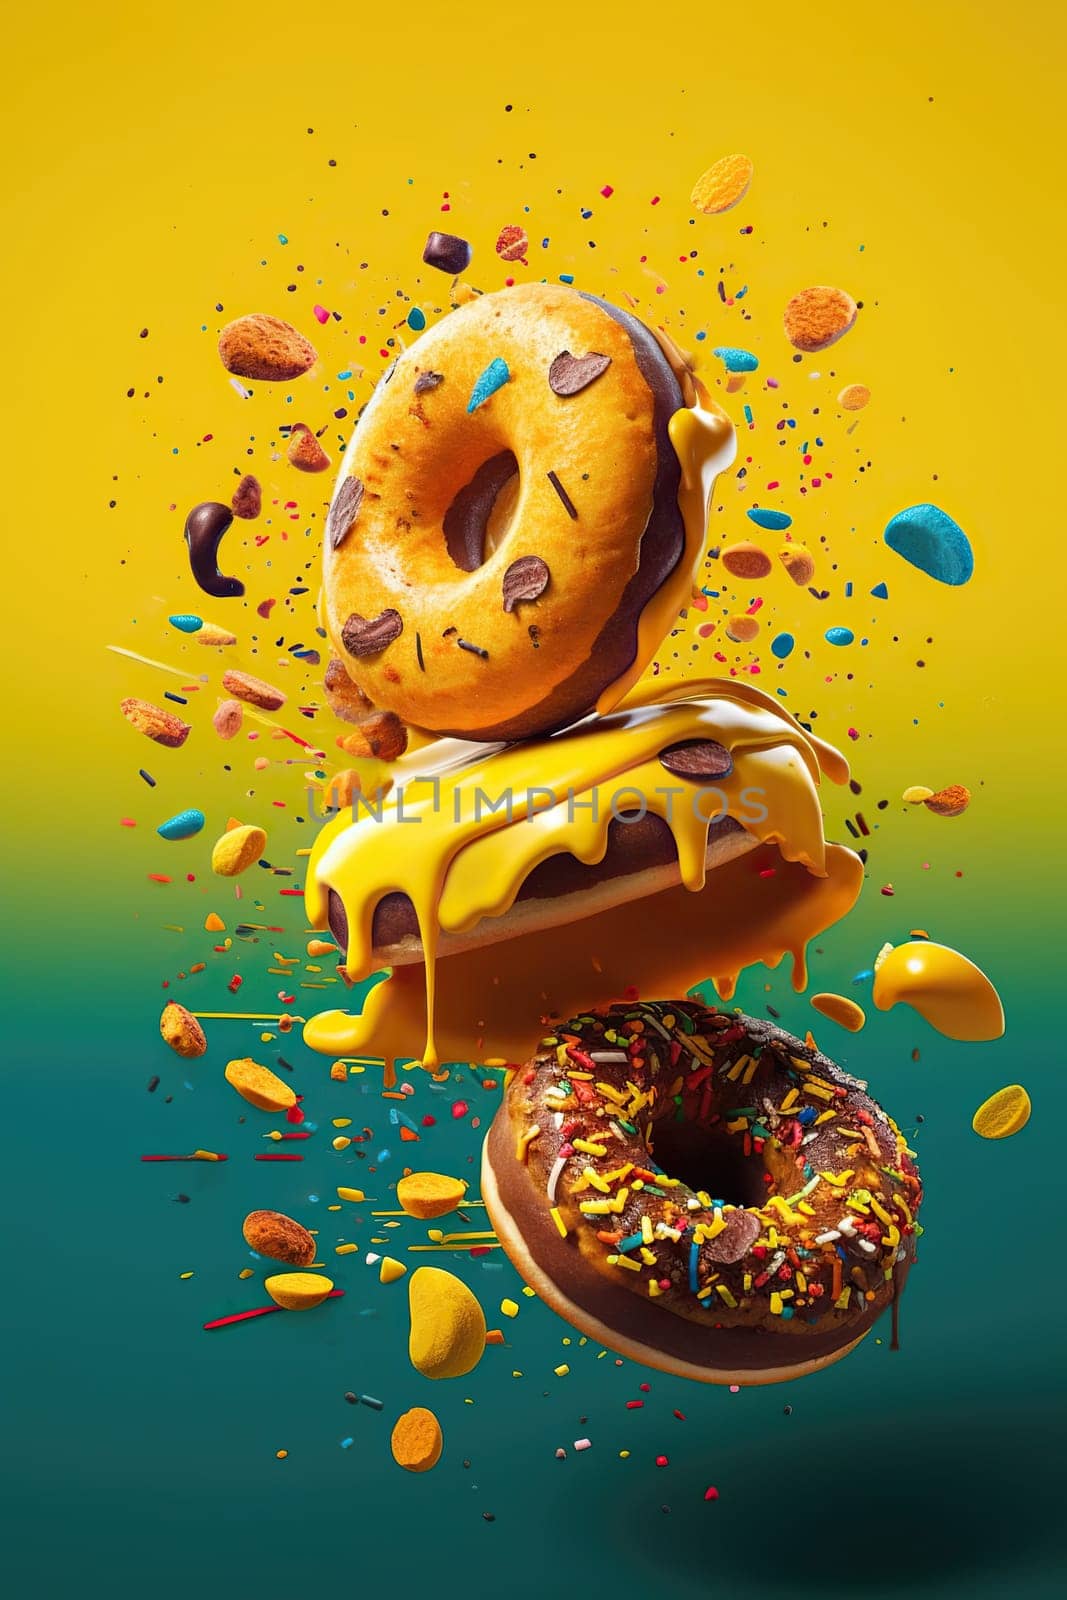 Illustration O Fflying Colorful Donuts With Topping And Icing